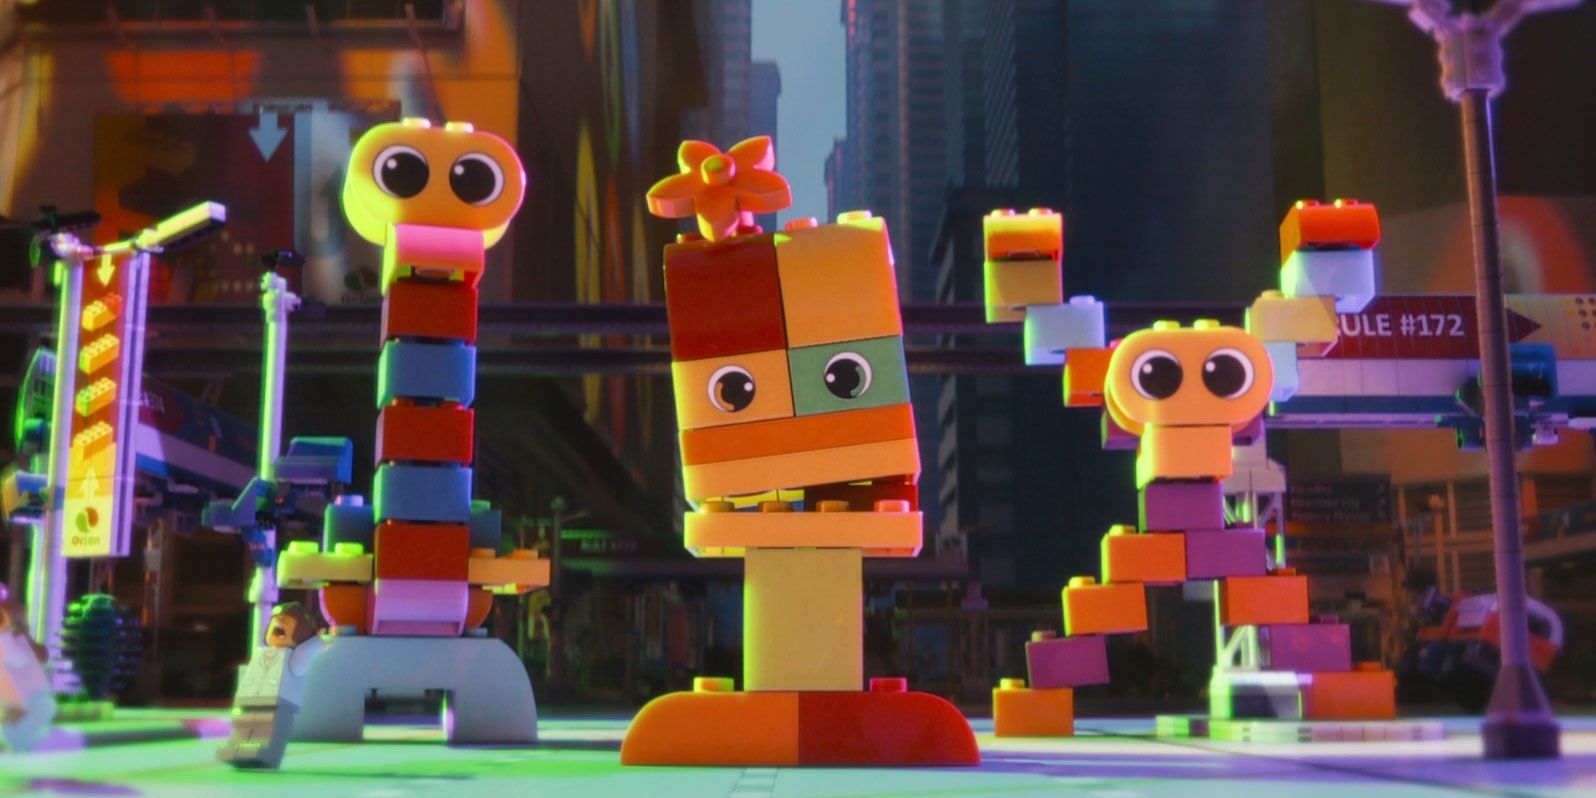 The Duplo aliens from The Lego Movie